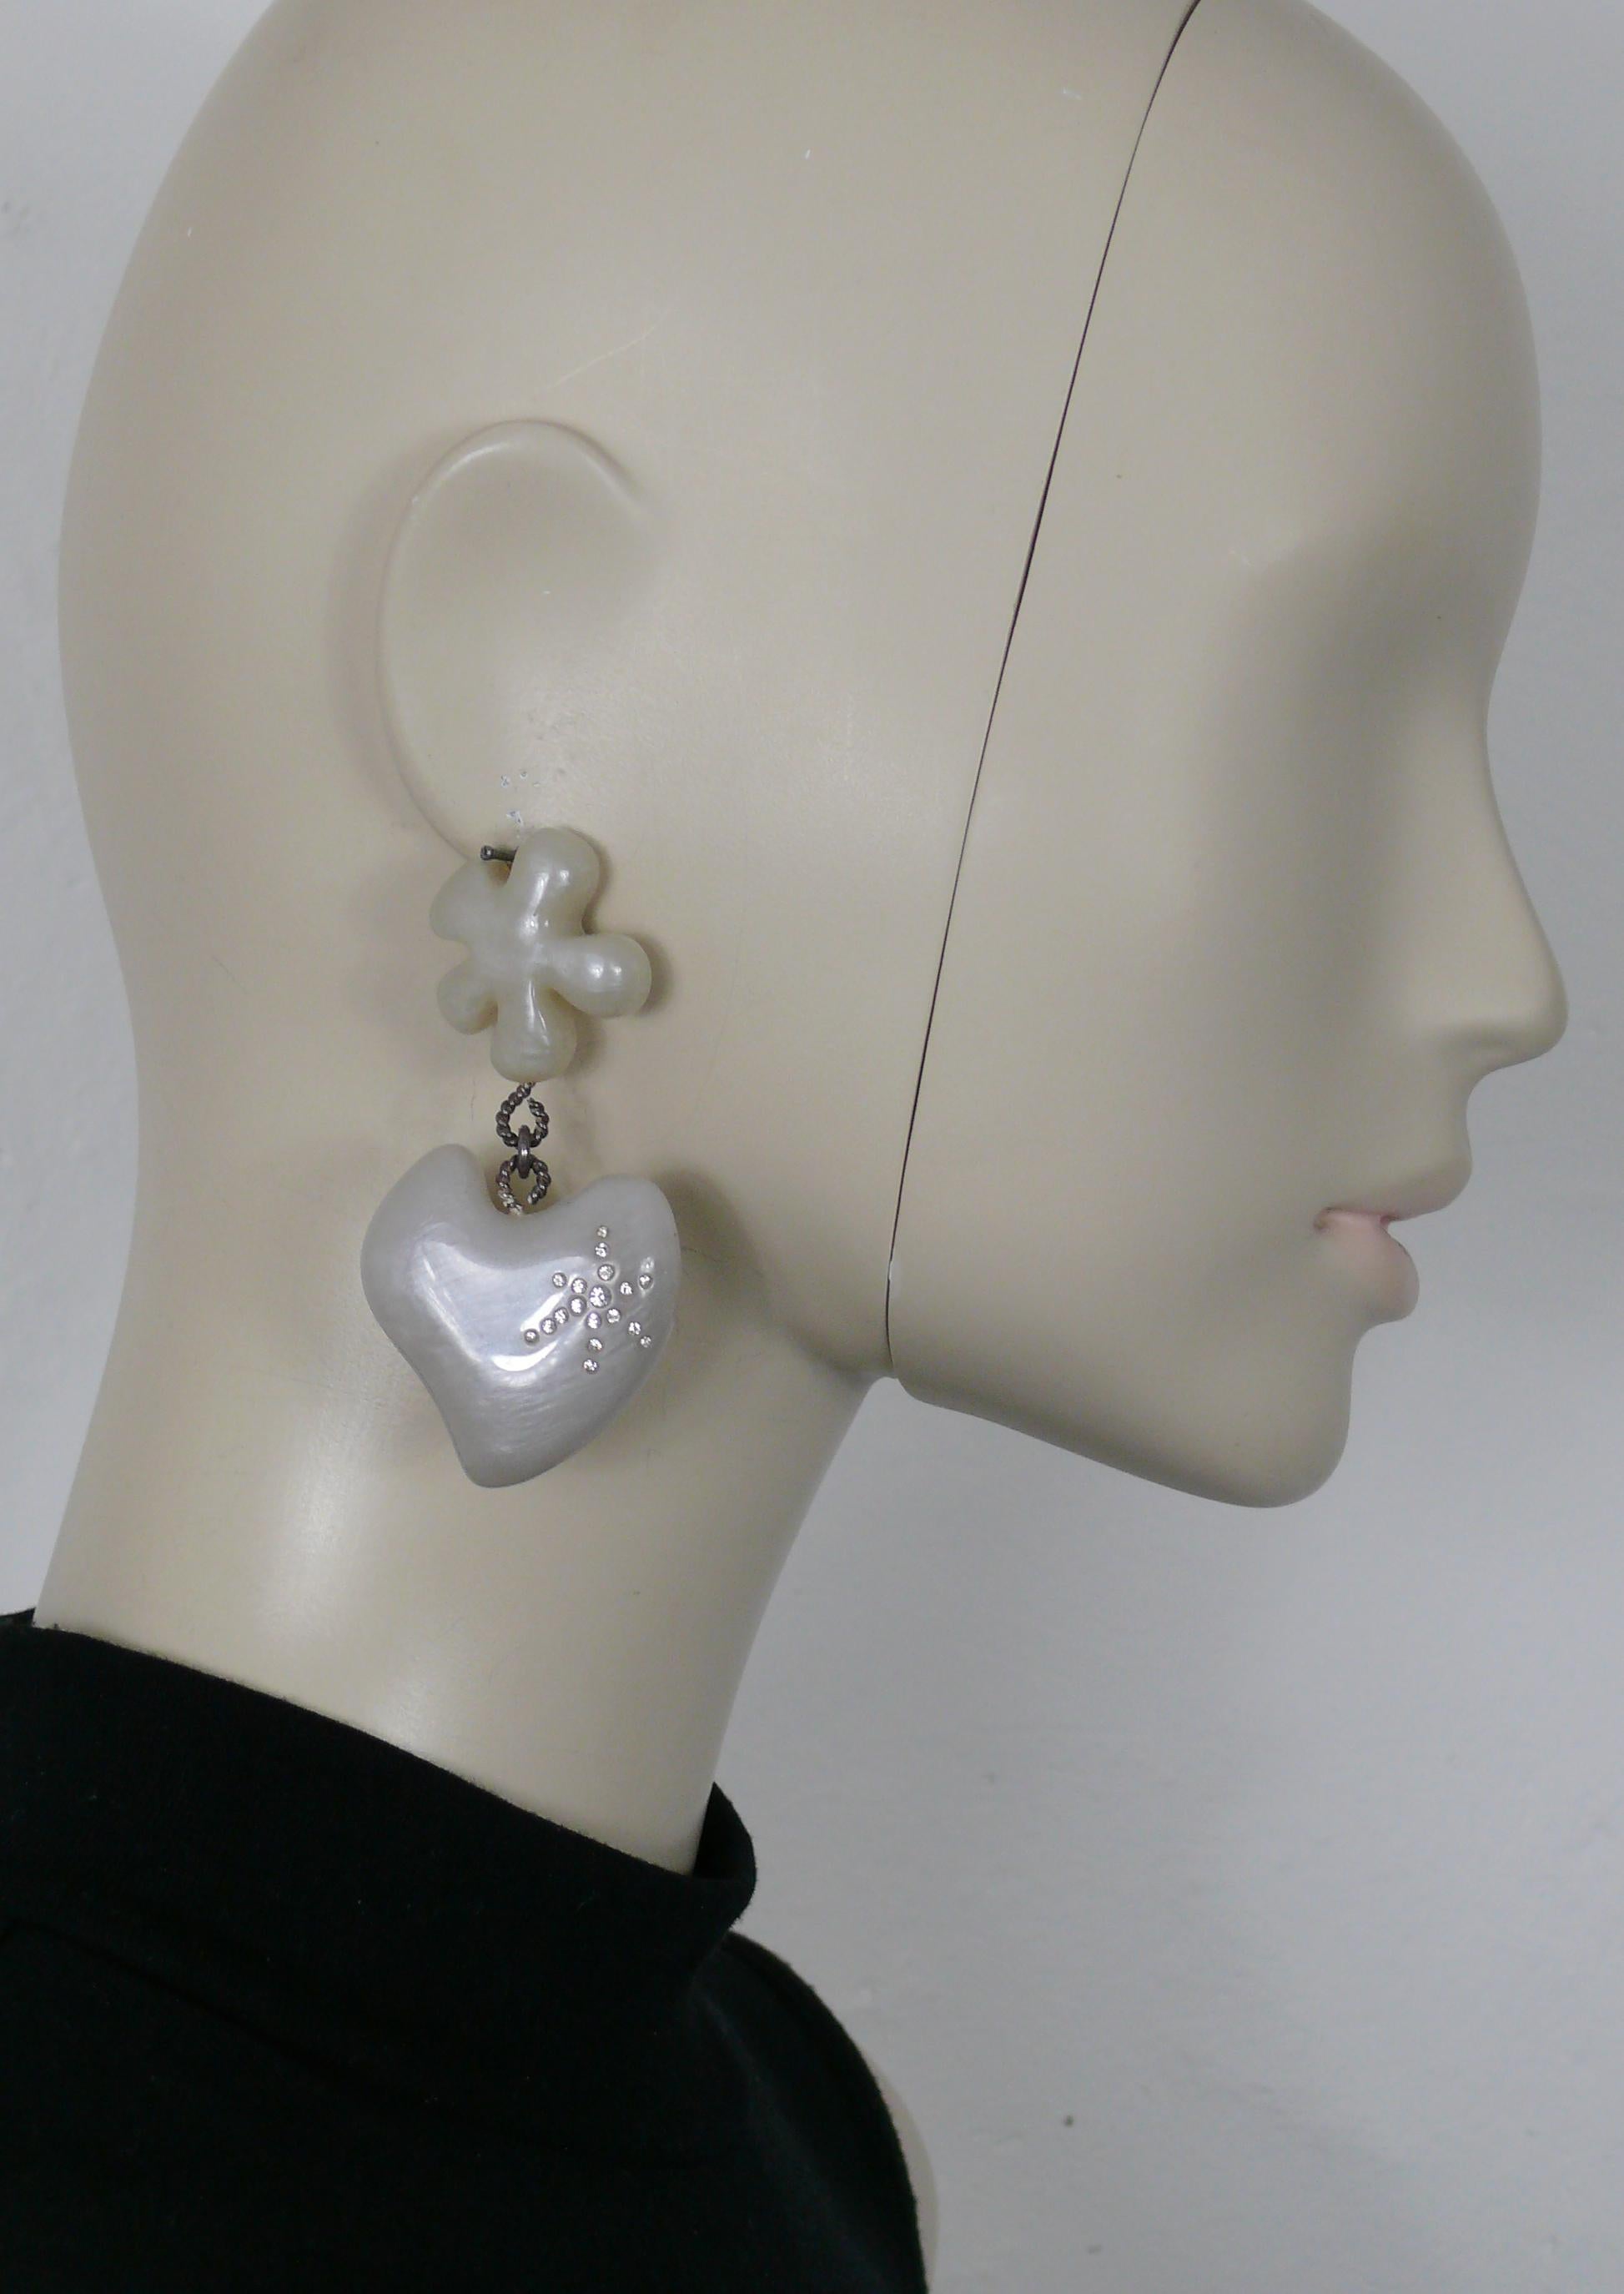 CHRISTIAN LACROIX vintage dangling earrings (clip-on) featuring pearly grey resin abstract flower and heart with crystal embellishement.

Marked CHRISTIAN LACROIX CL Made in France.

Indicative measurements : max. height approx. 7.3 cm (2.87 inches)